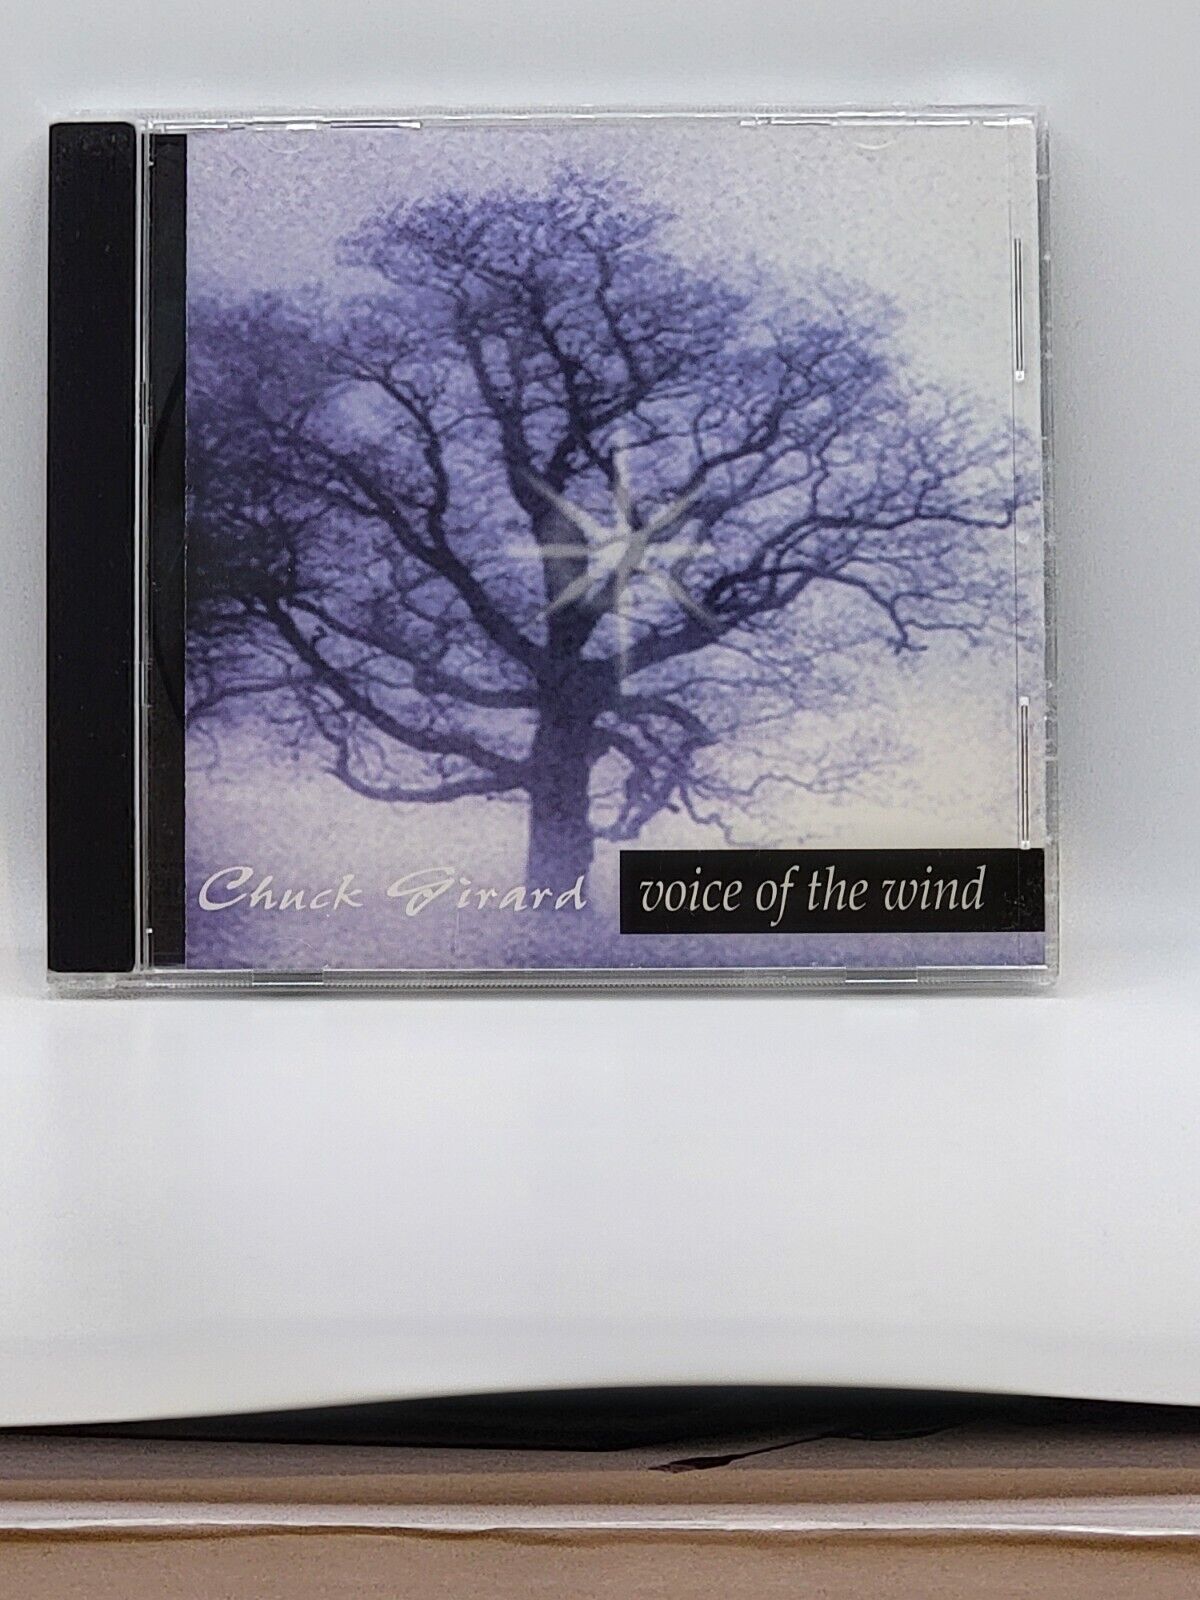 Chuck Girard - Voice of the Wind - CD